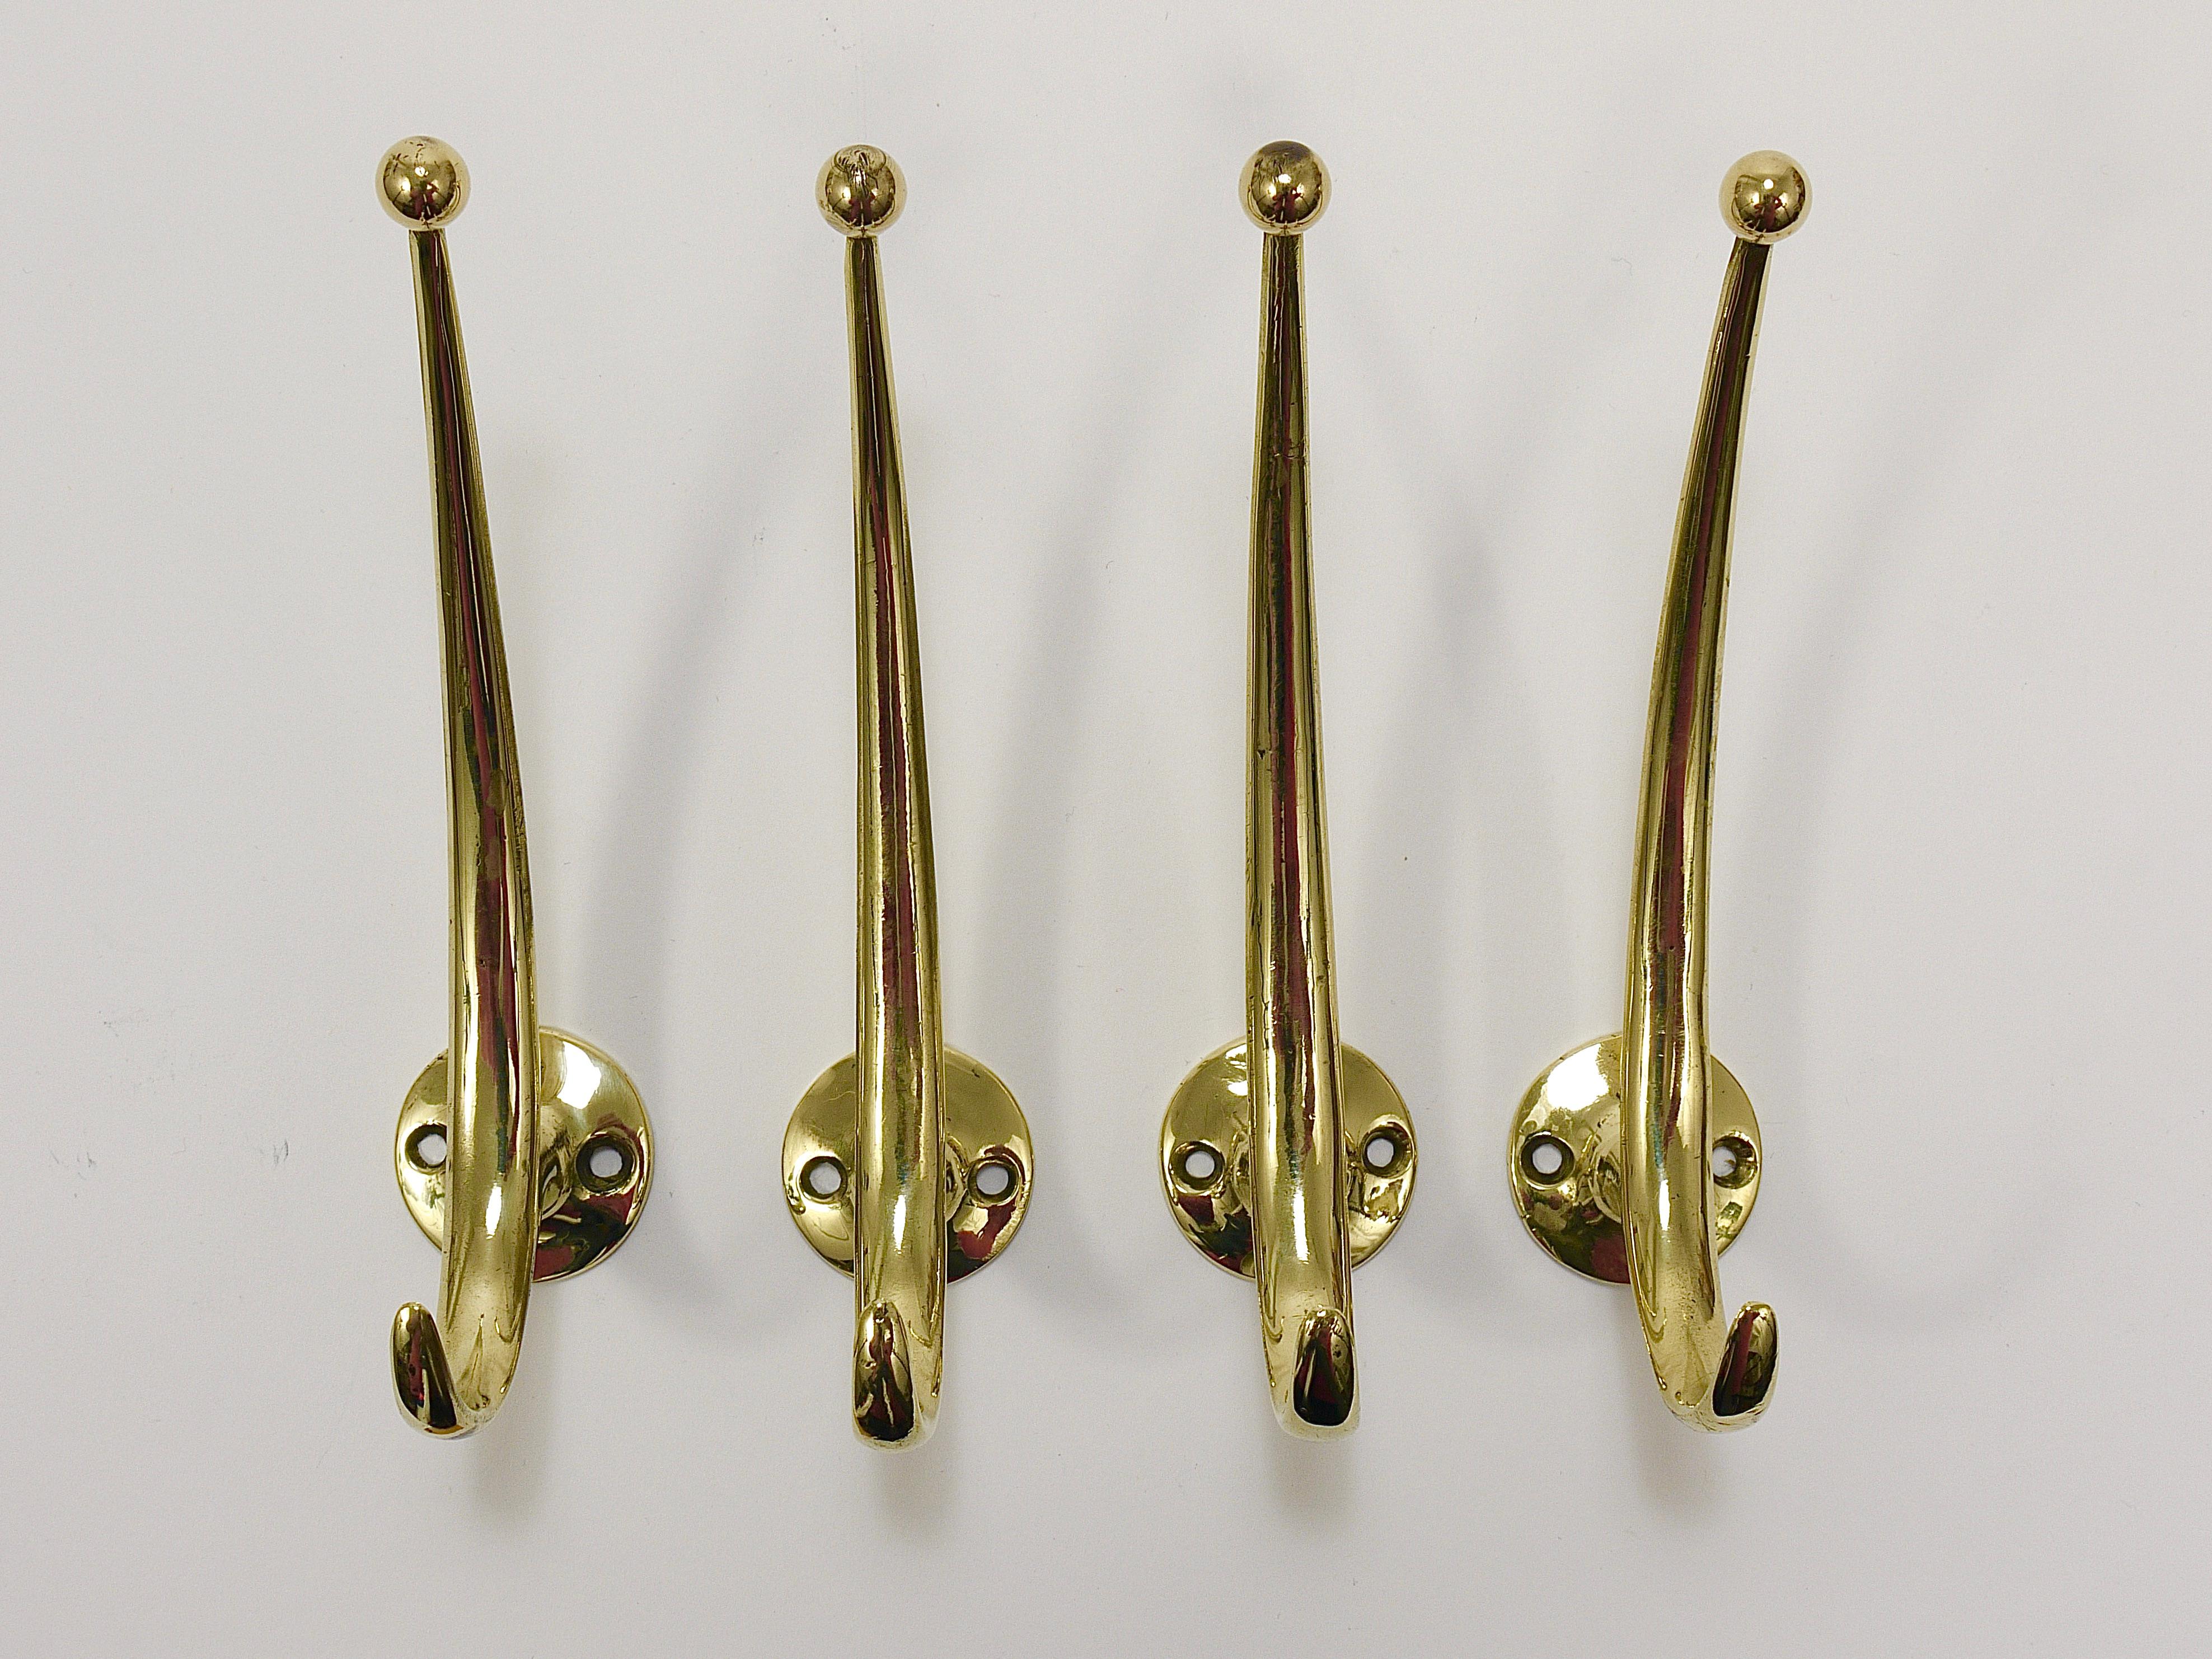 Six Franz Hagenauer Vienna Mid-Century Curved Brass Wall Coat Hooks, 1950s For Sale 3